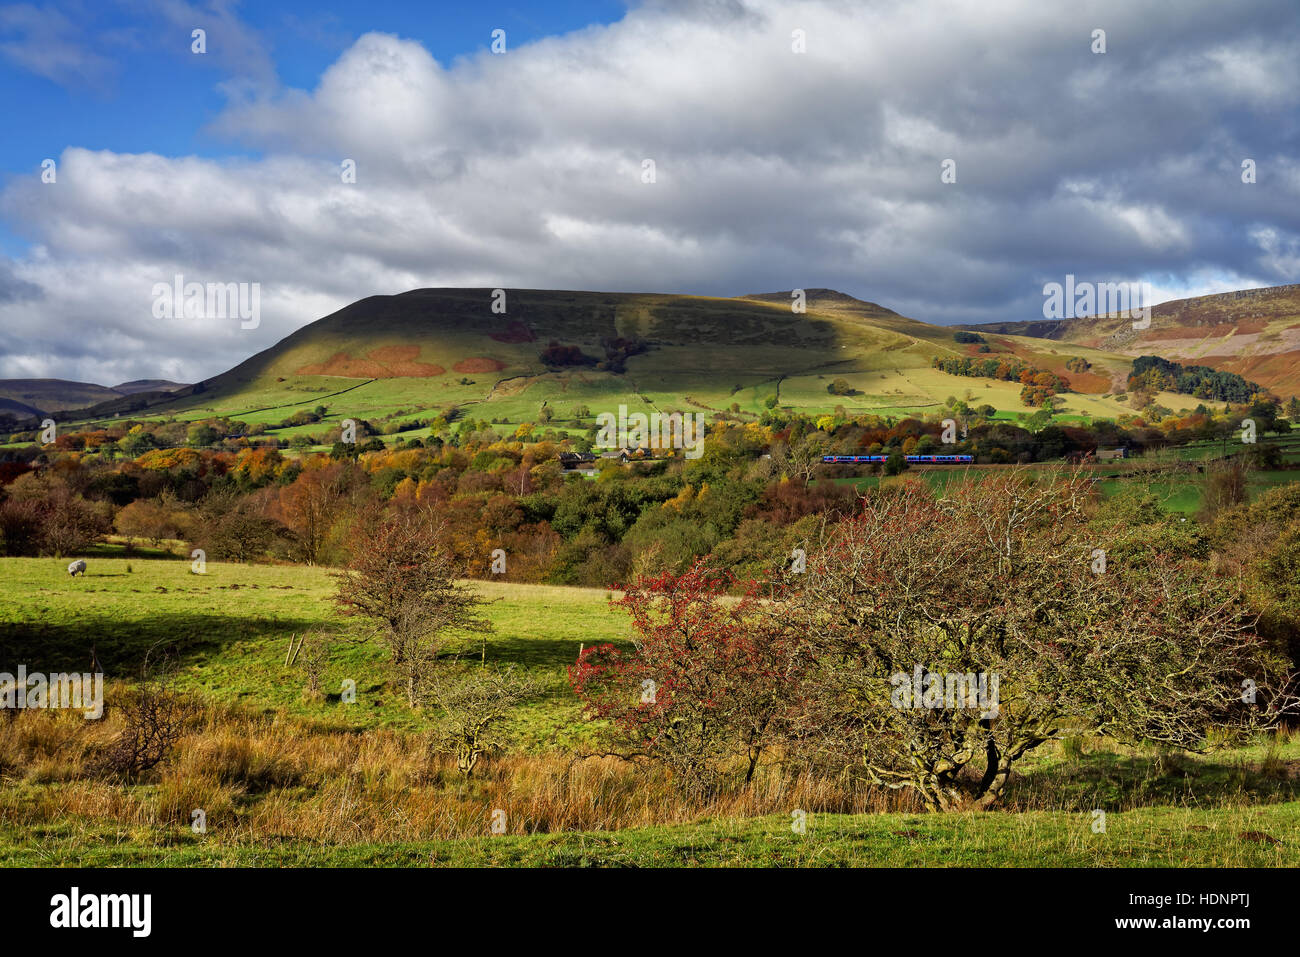 UK,Derbyshire,Peak District,Edale,Trans Pennine Express Train in the Hope Valley, with Grindsbrook Knoll and Kinder Scout Stock Photo